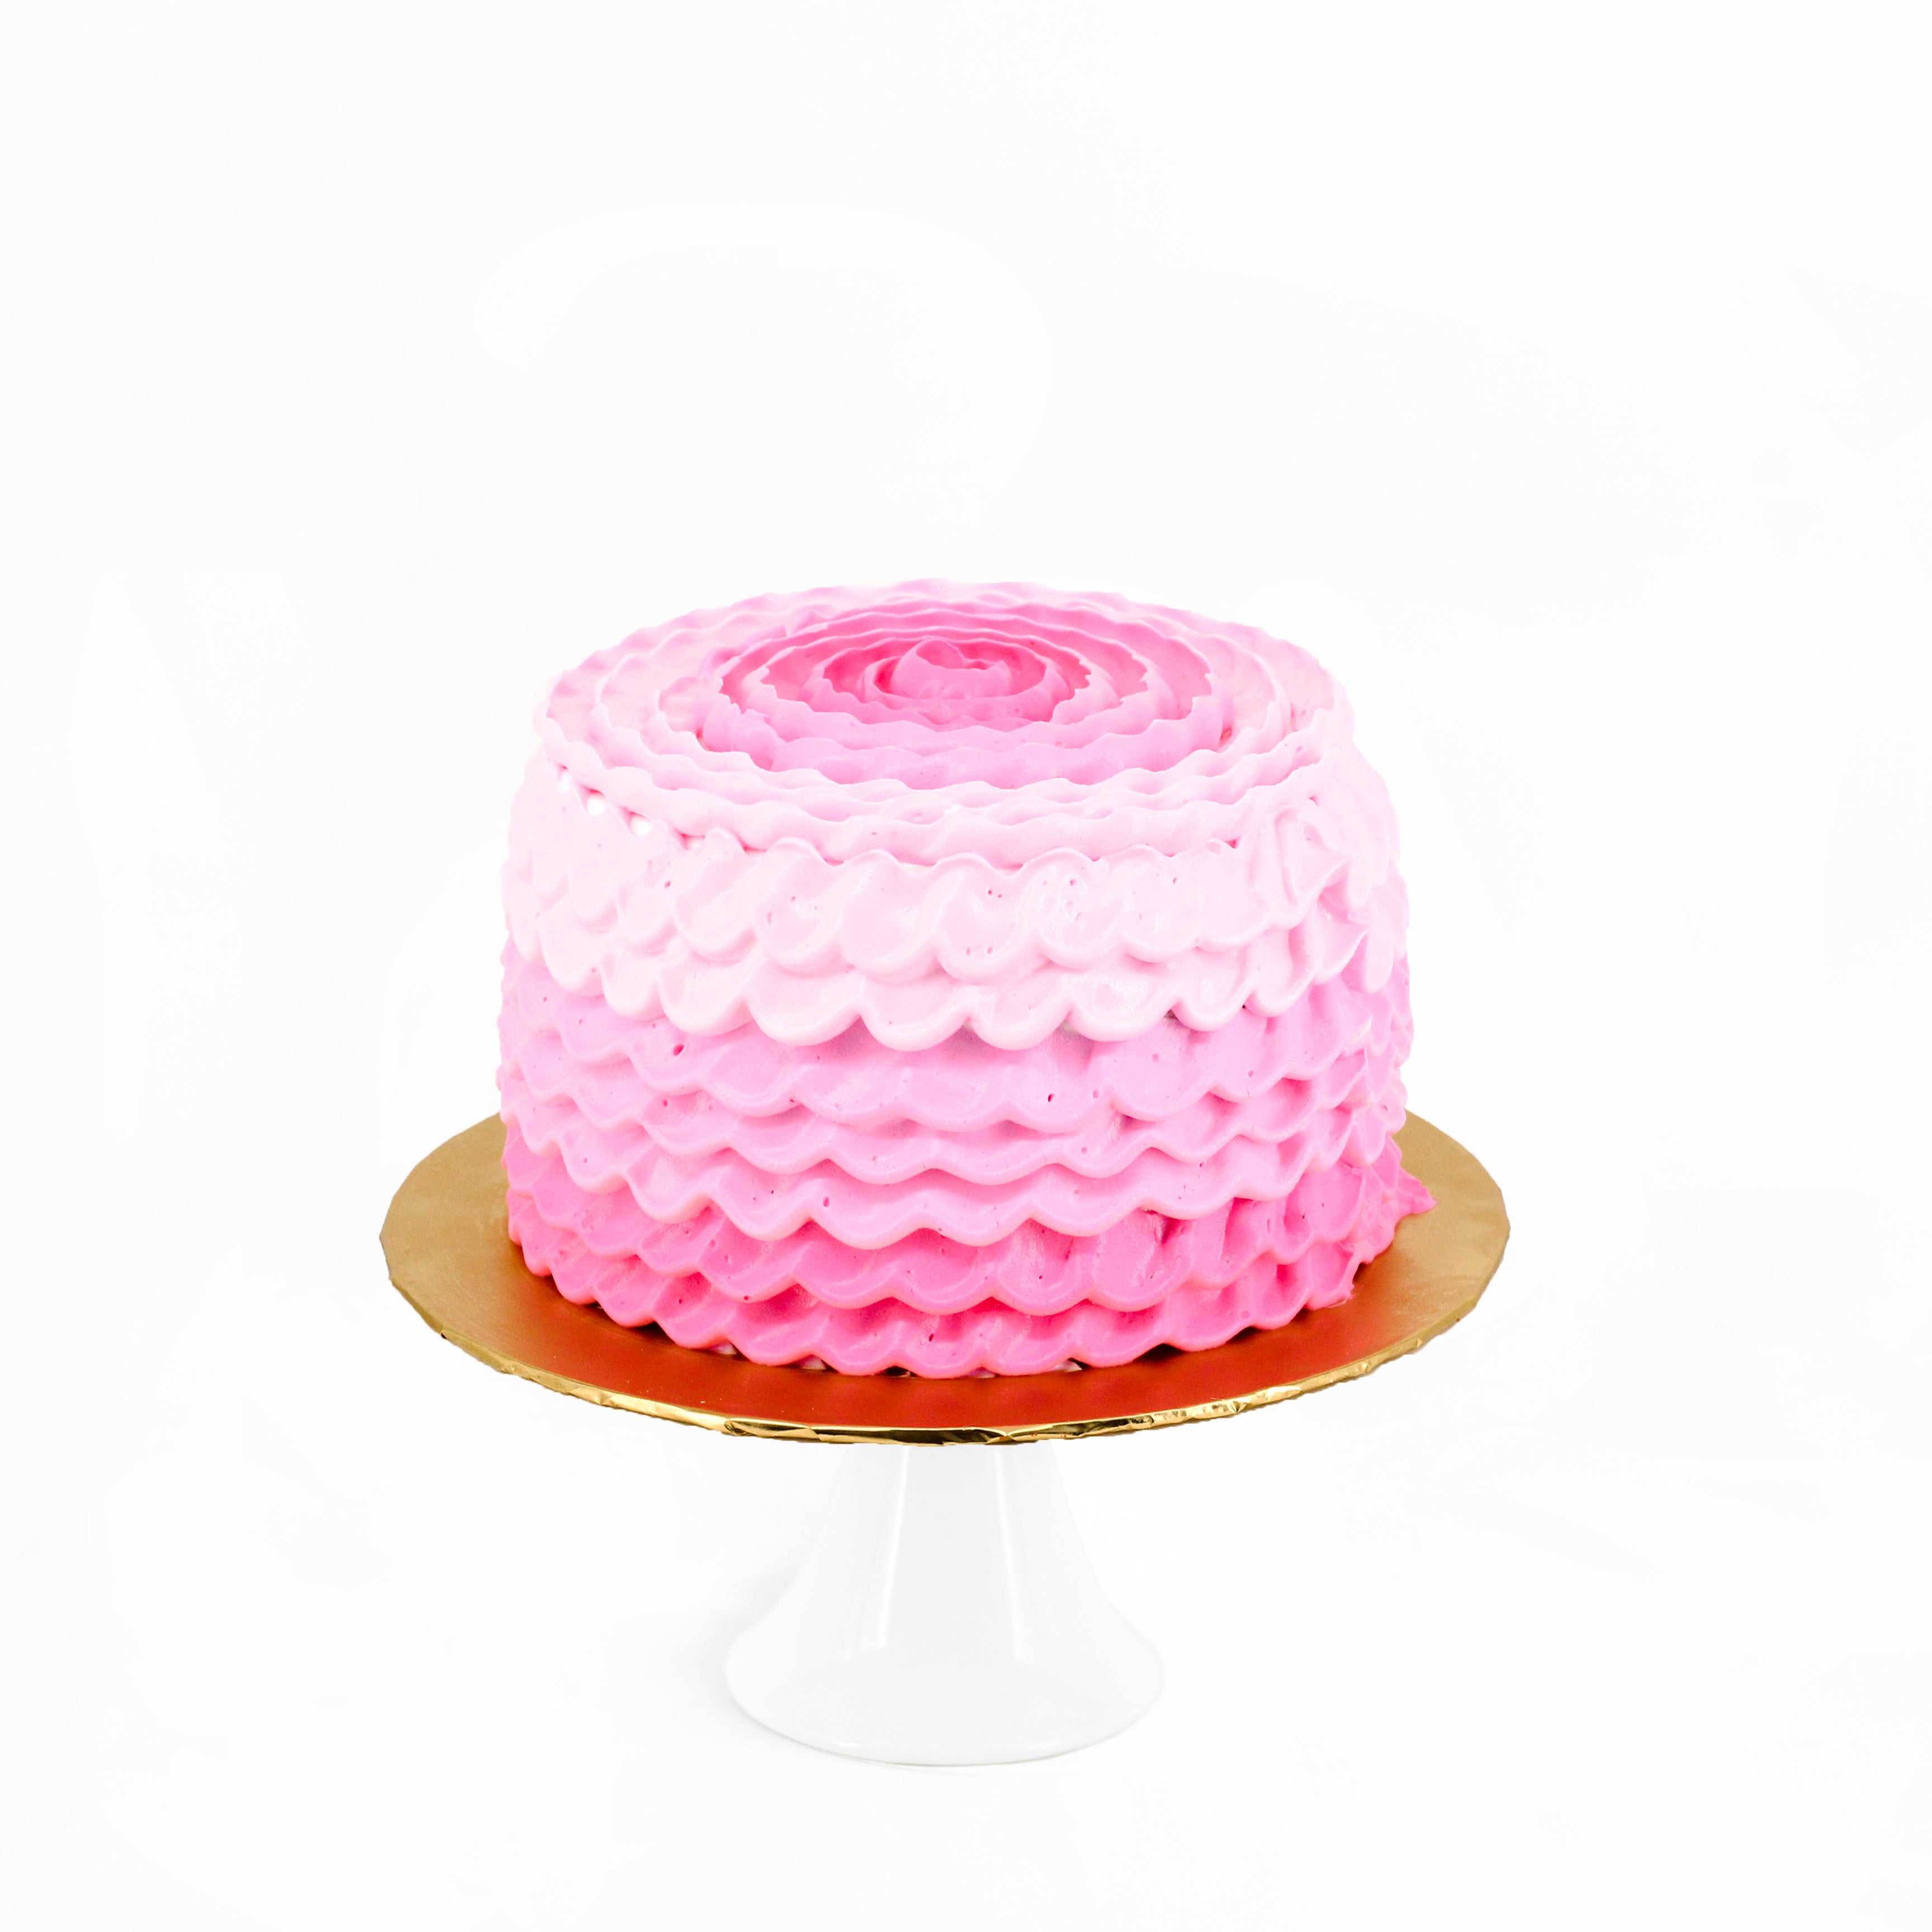 Pink Ombre Ruffle Cake Video Tutorial - Cakes by Lynz